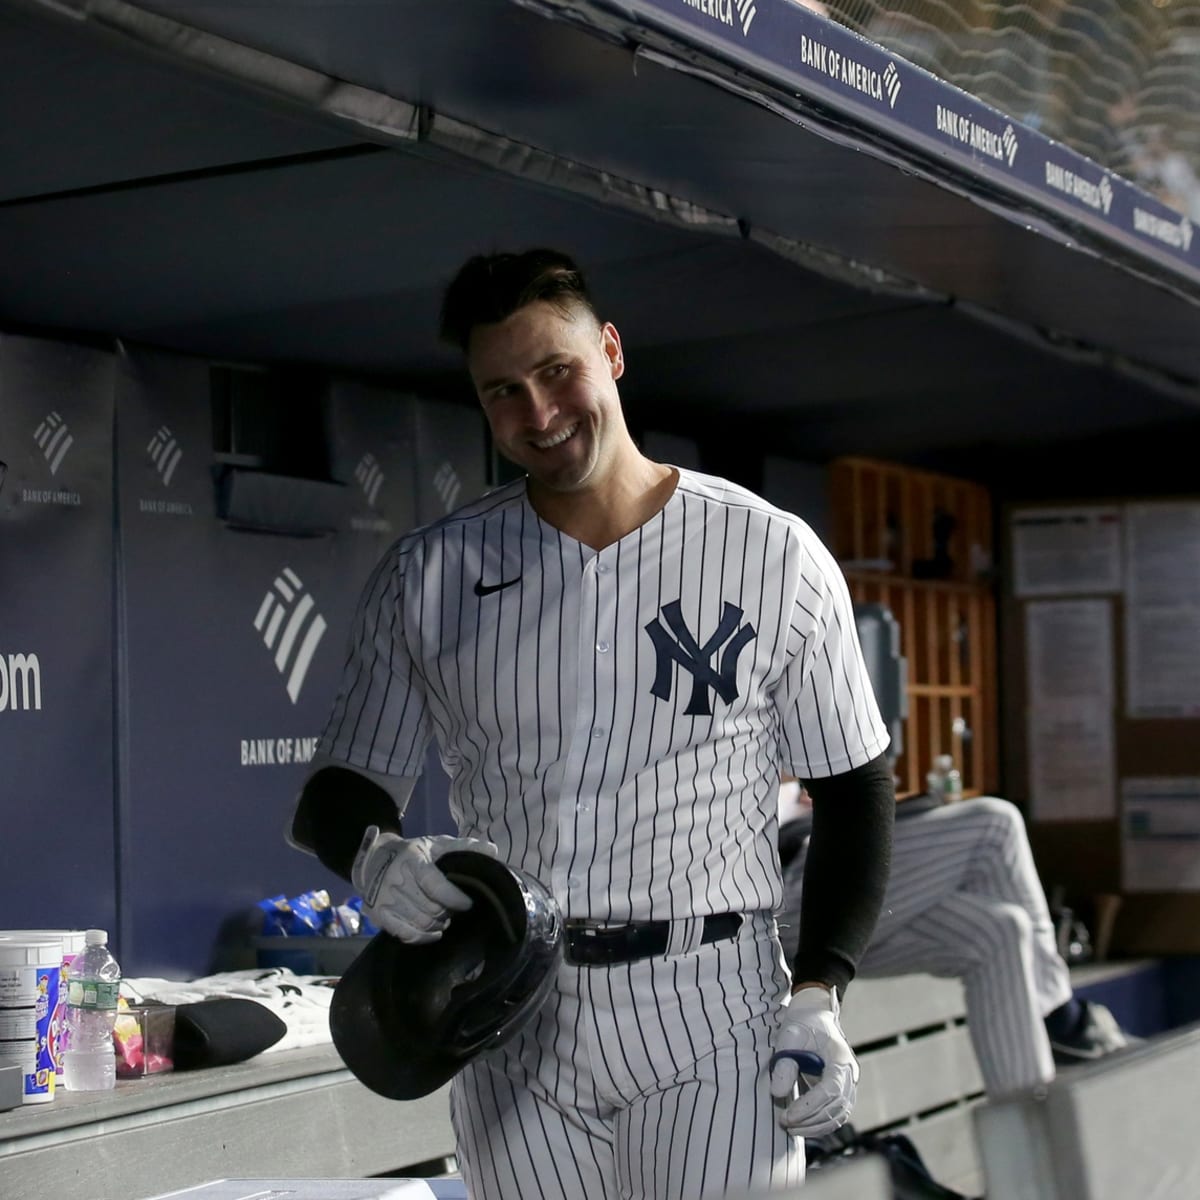 Yankees beat Cleveland 8-0 behind Joey Gallo homers